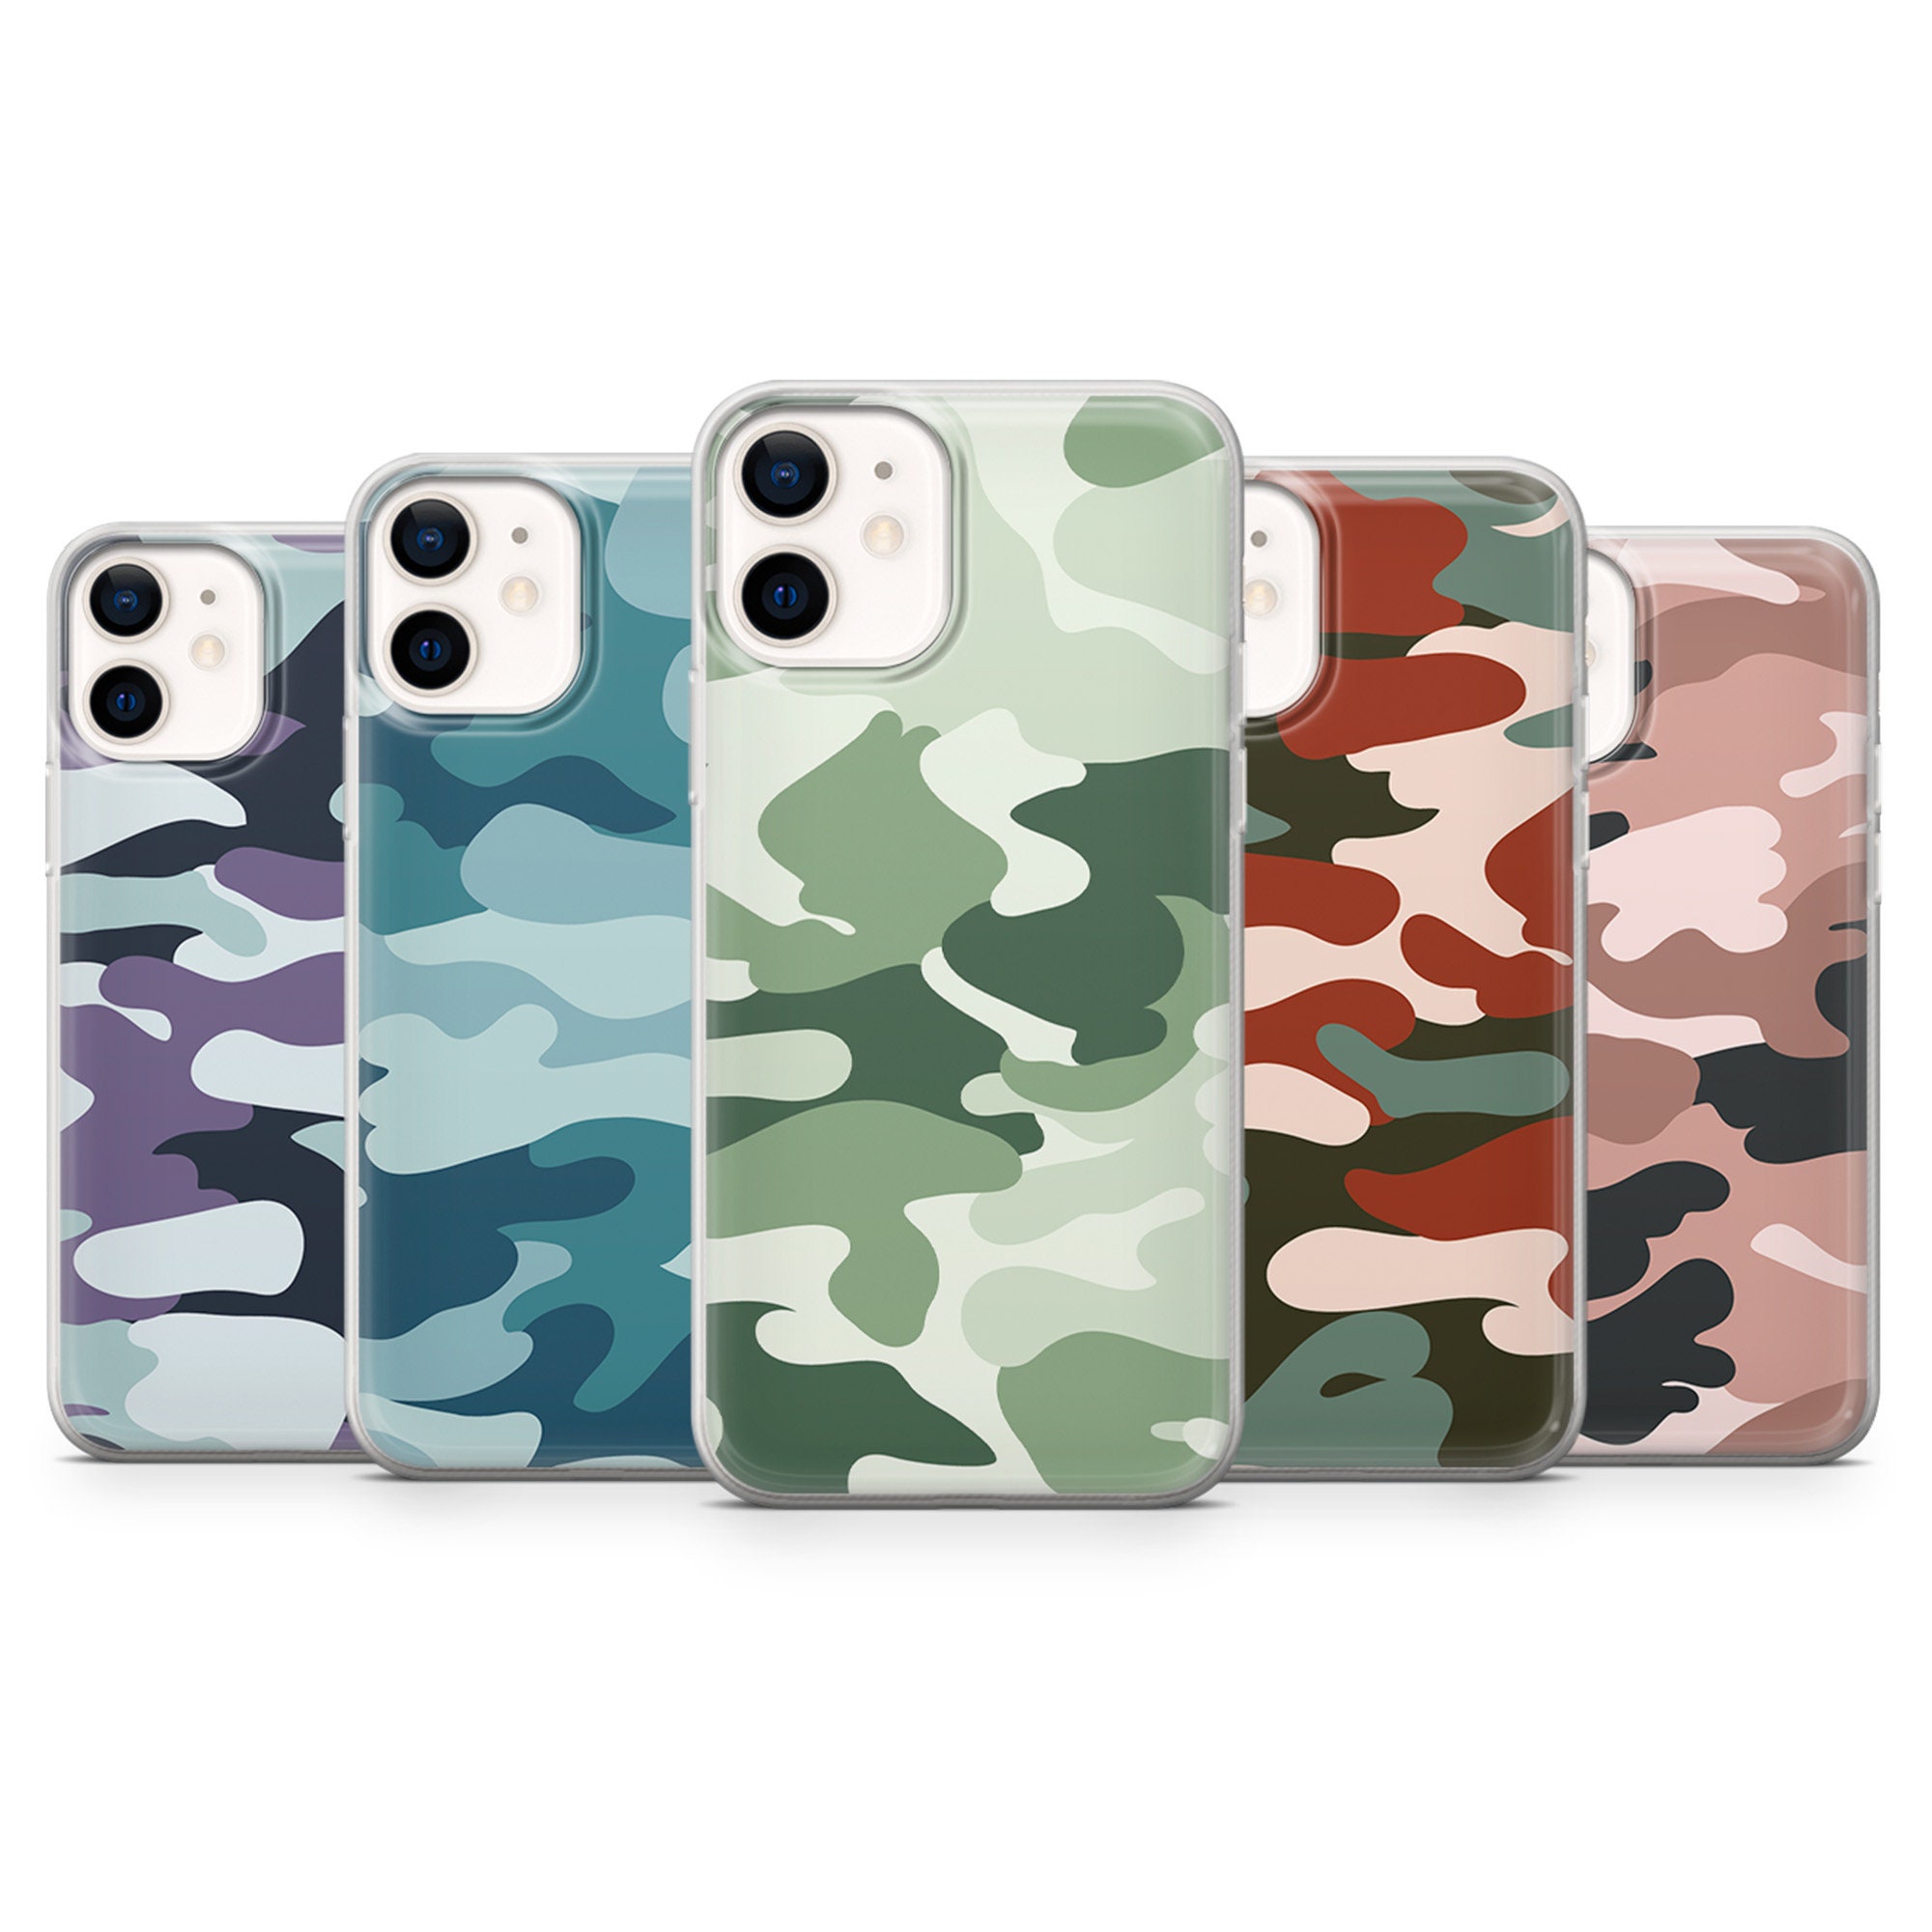 S7 Galaxy S10 S9 5 shock proof phone wallet 9 shockproof S8 Pink Camo case for Galaxy Note 10 8 S6 Galaxy A20 including Plus and Active models phone case 